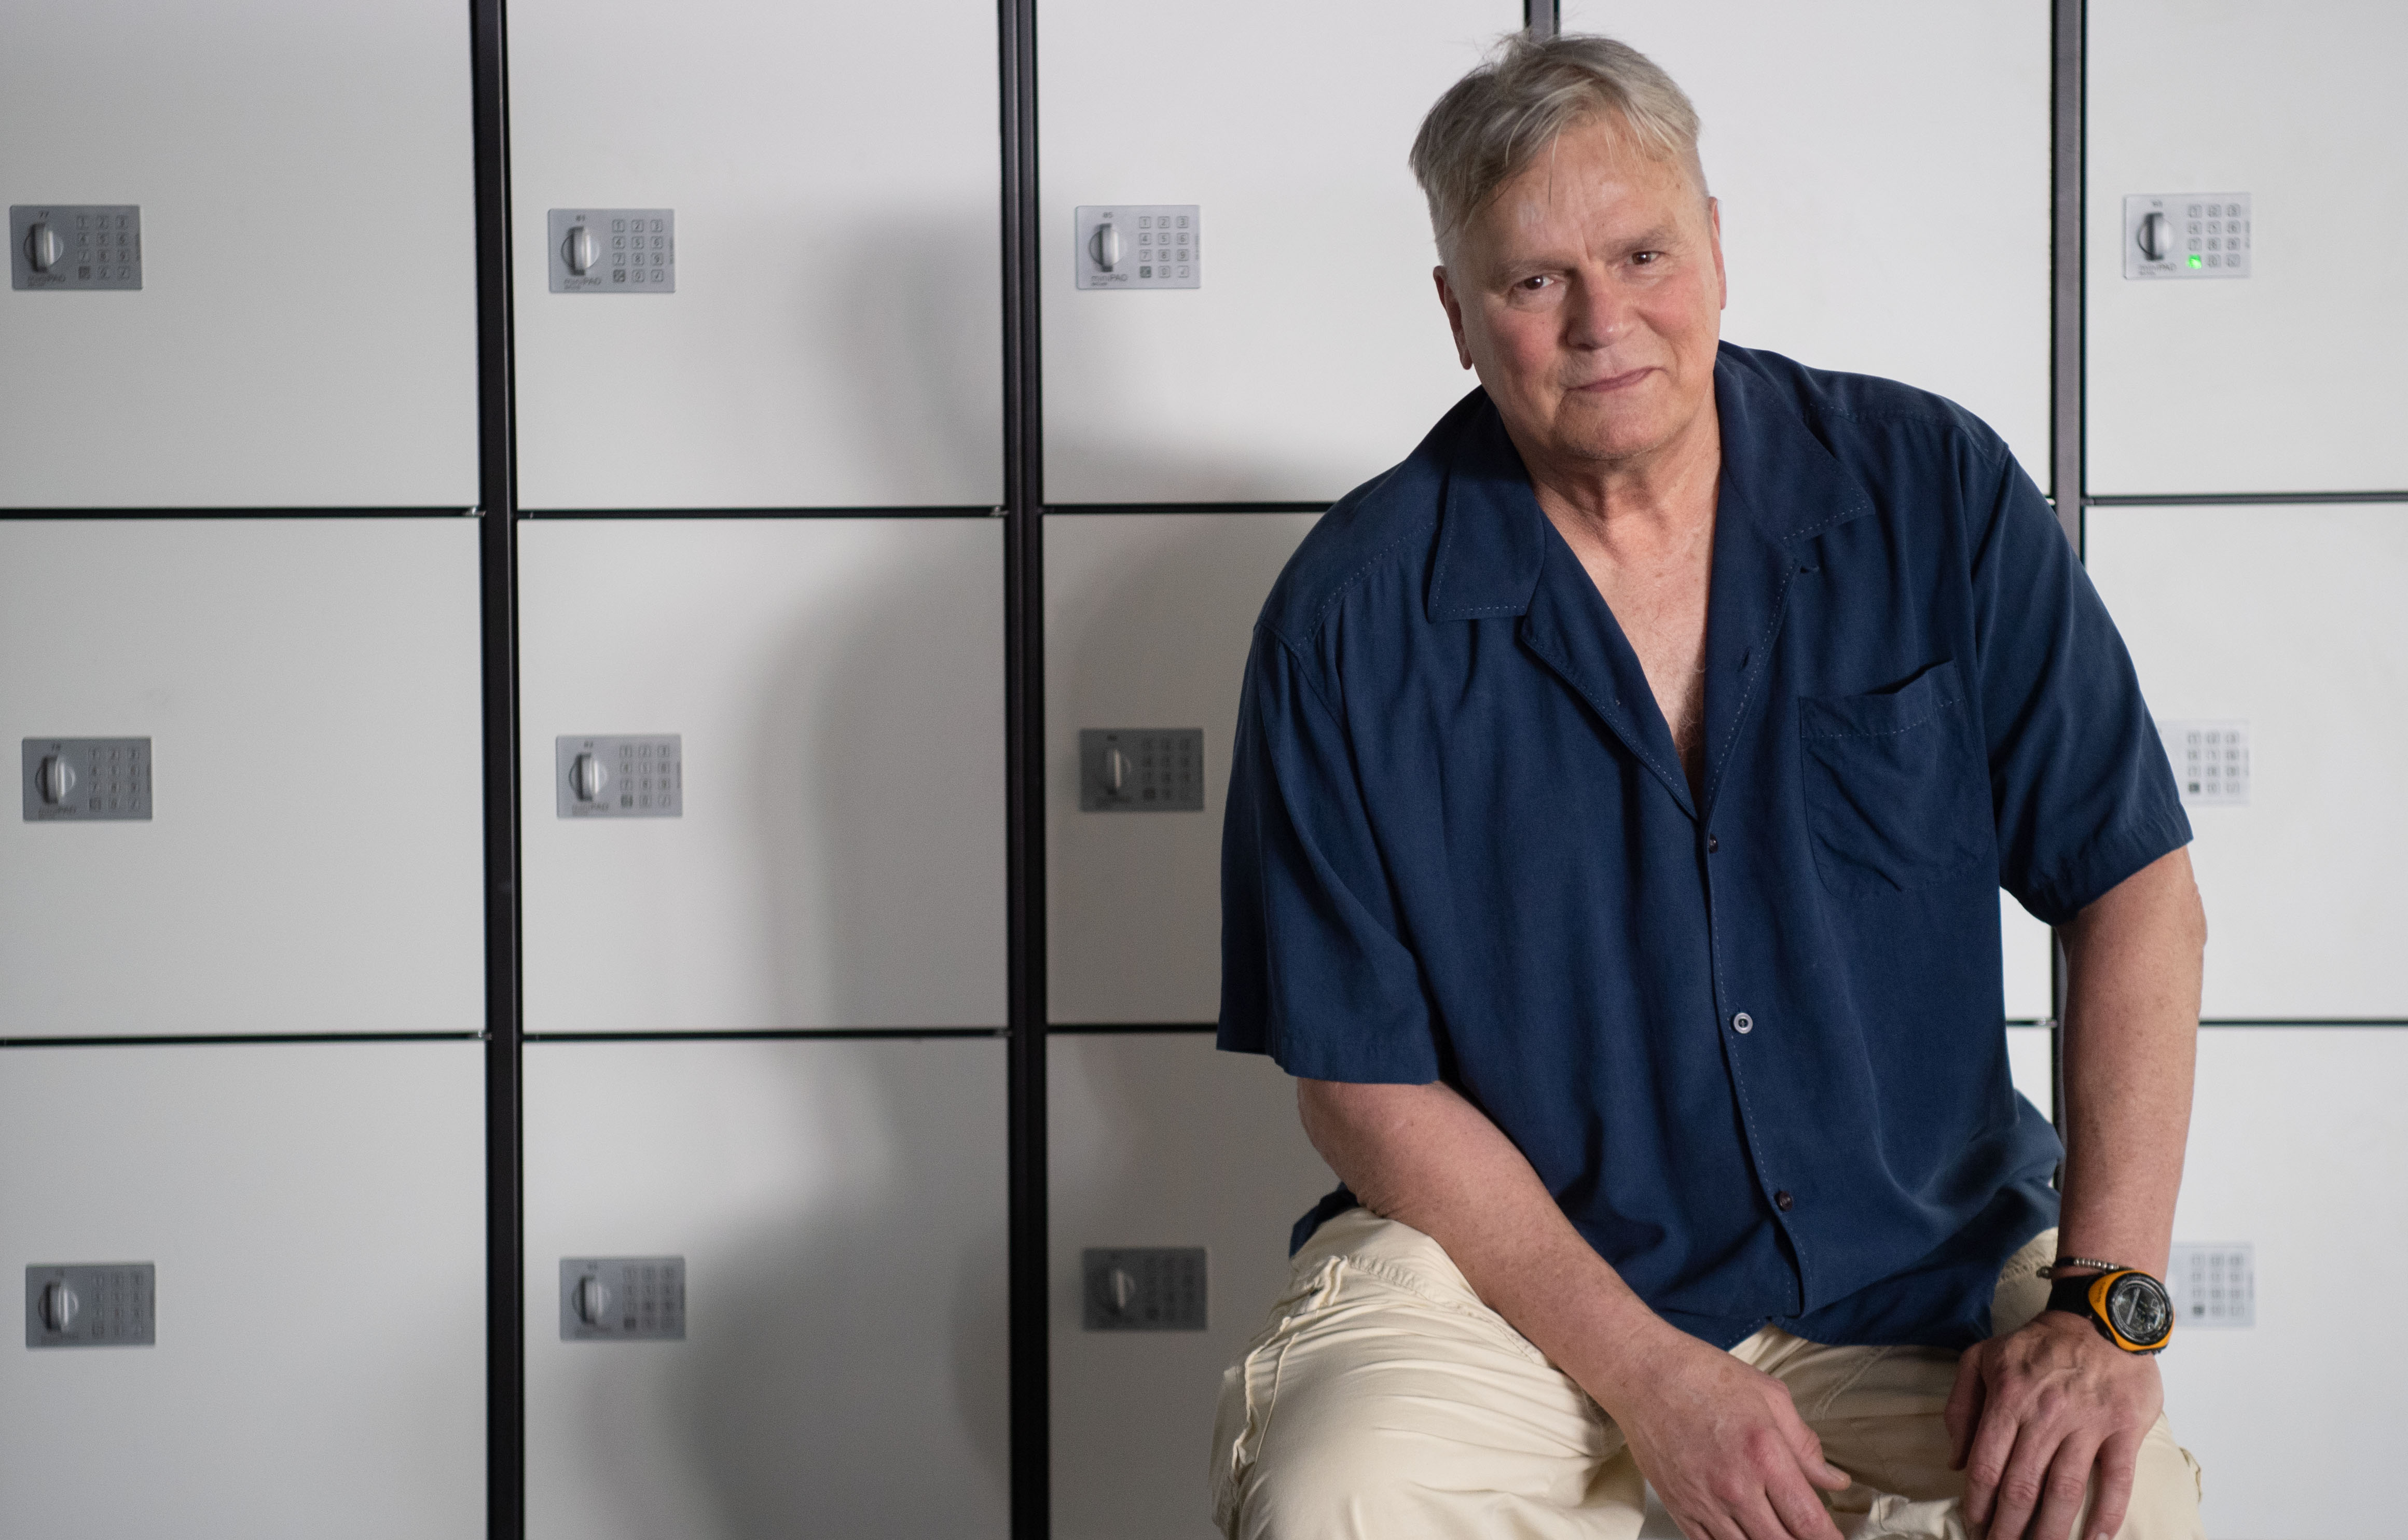 Richard Dean Anderson in Germany on June 27, 2019. | Source: Getty Images